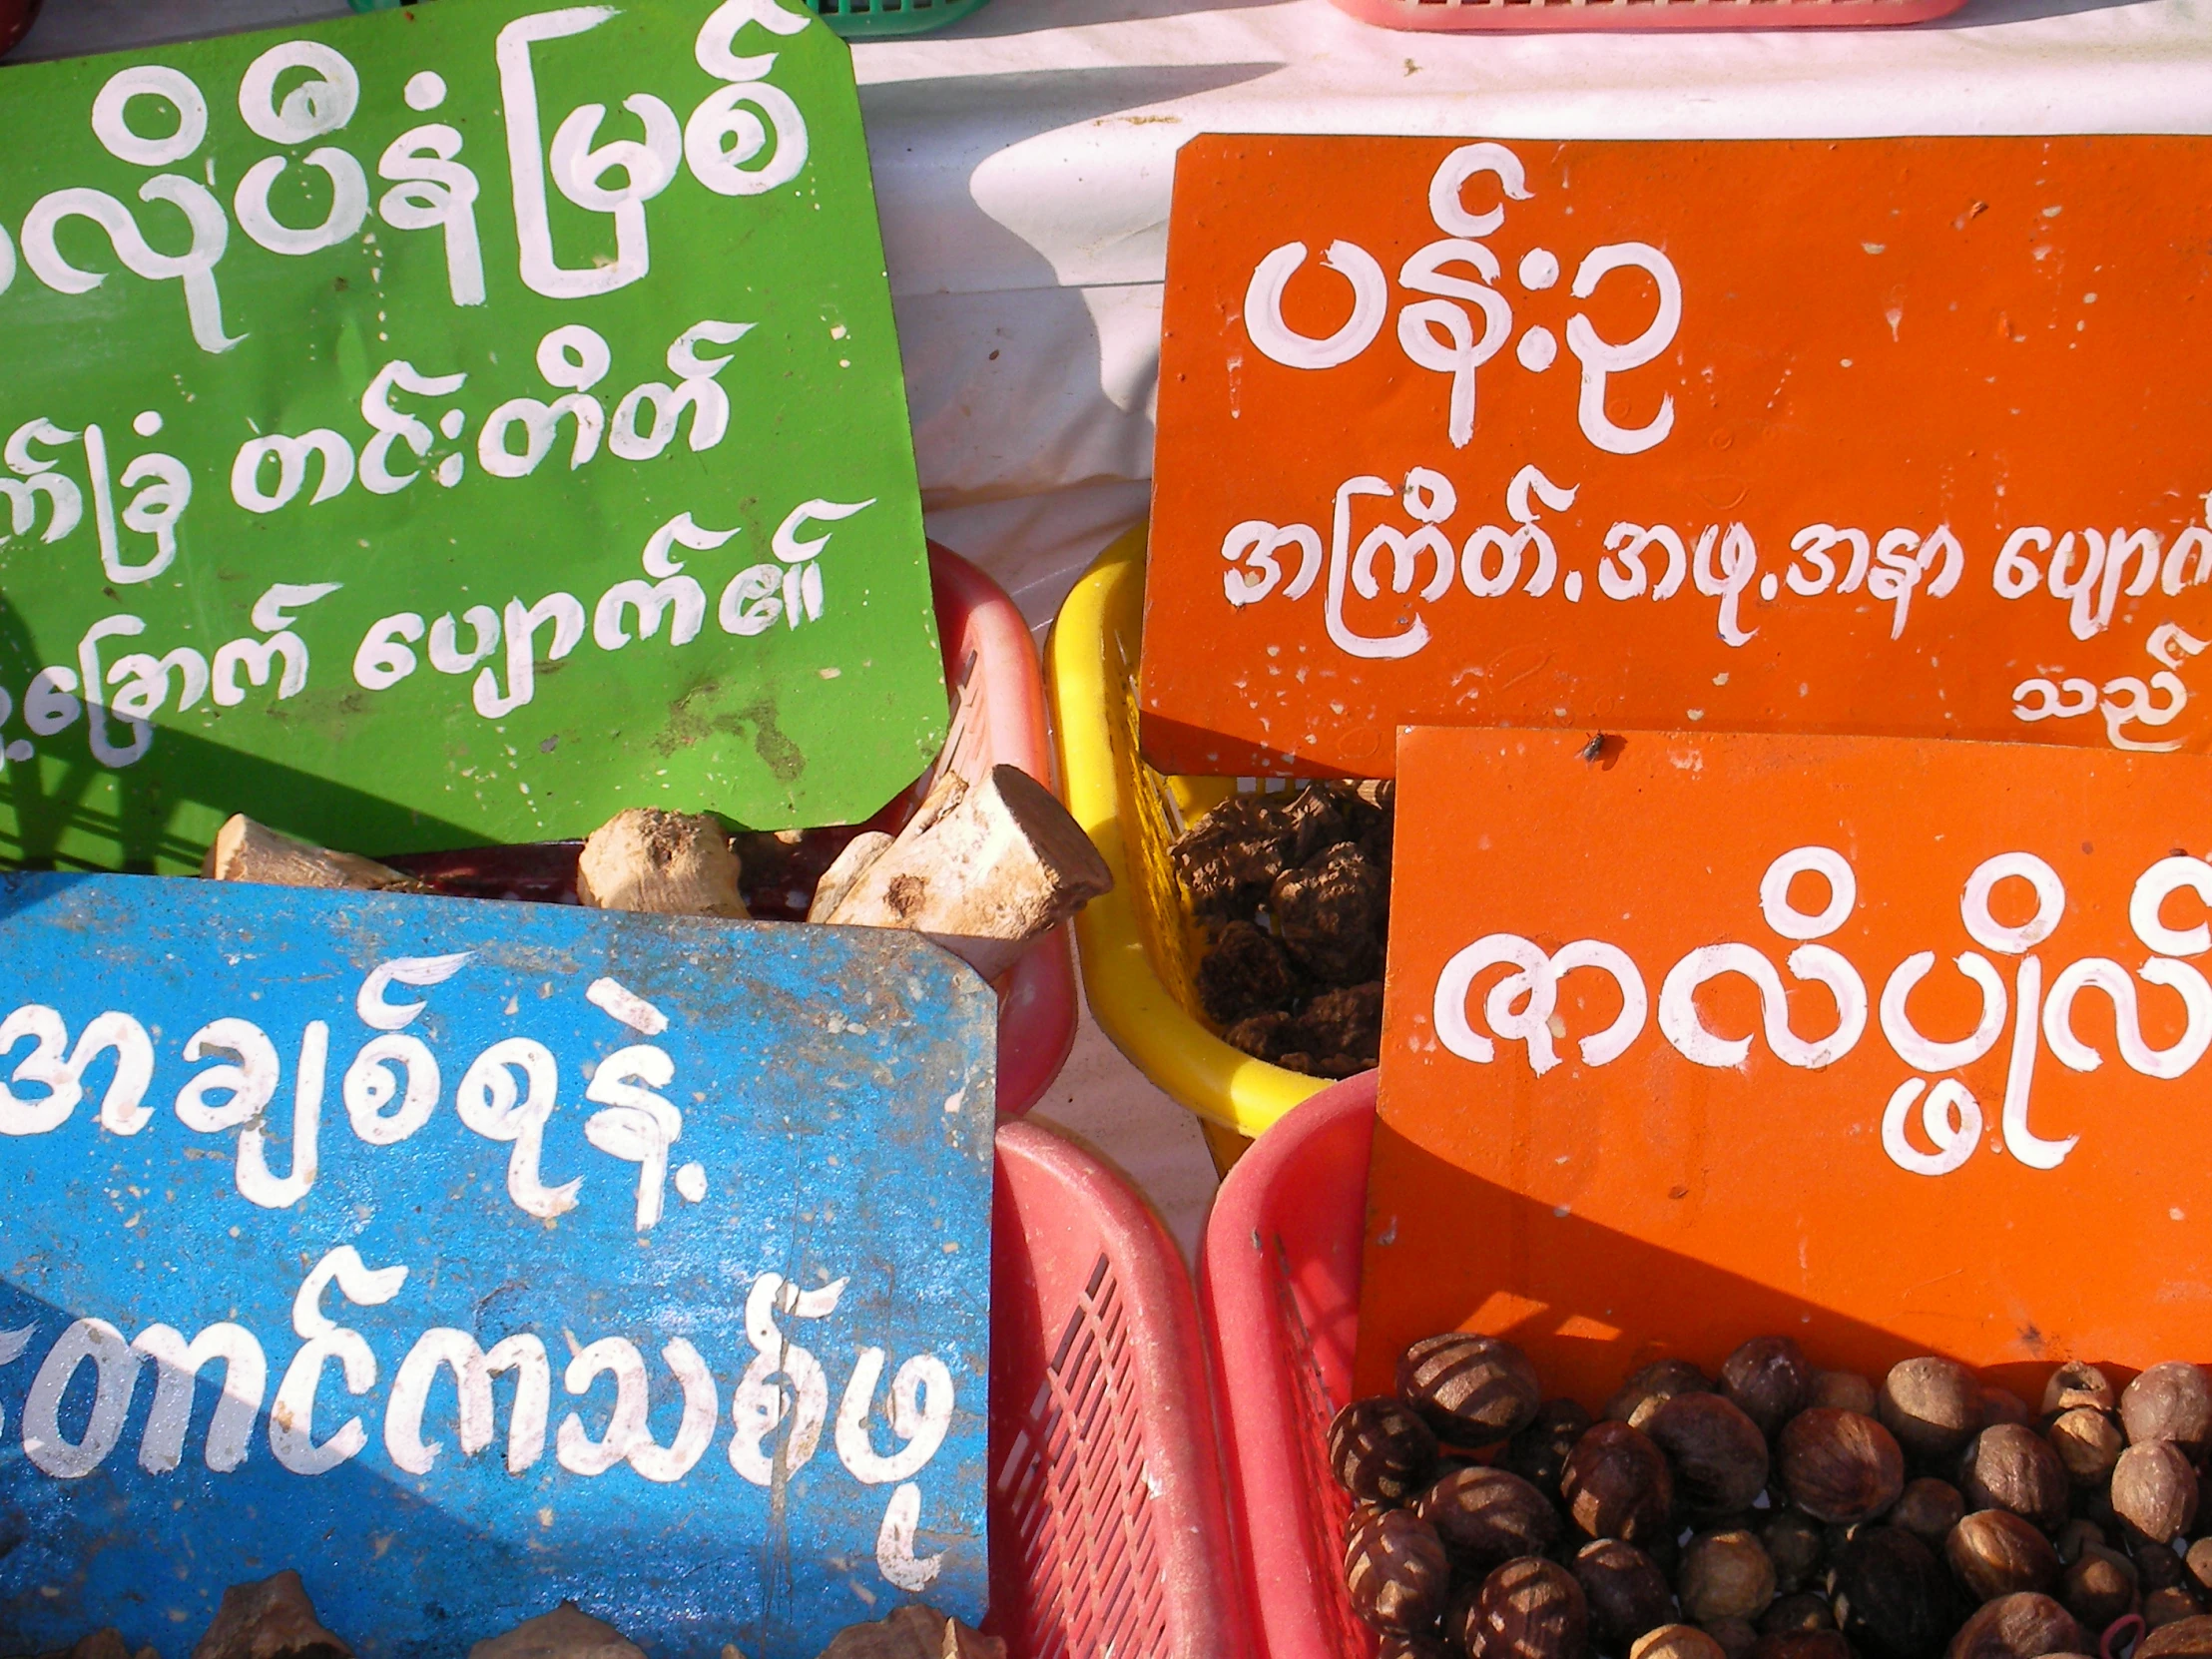 colorful signs displayed for sale in bins outside